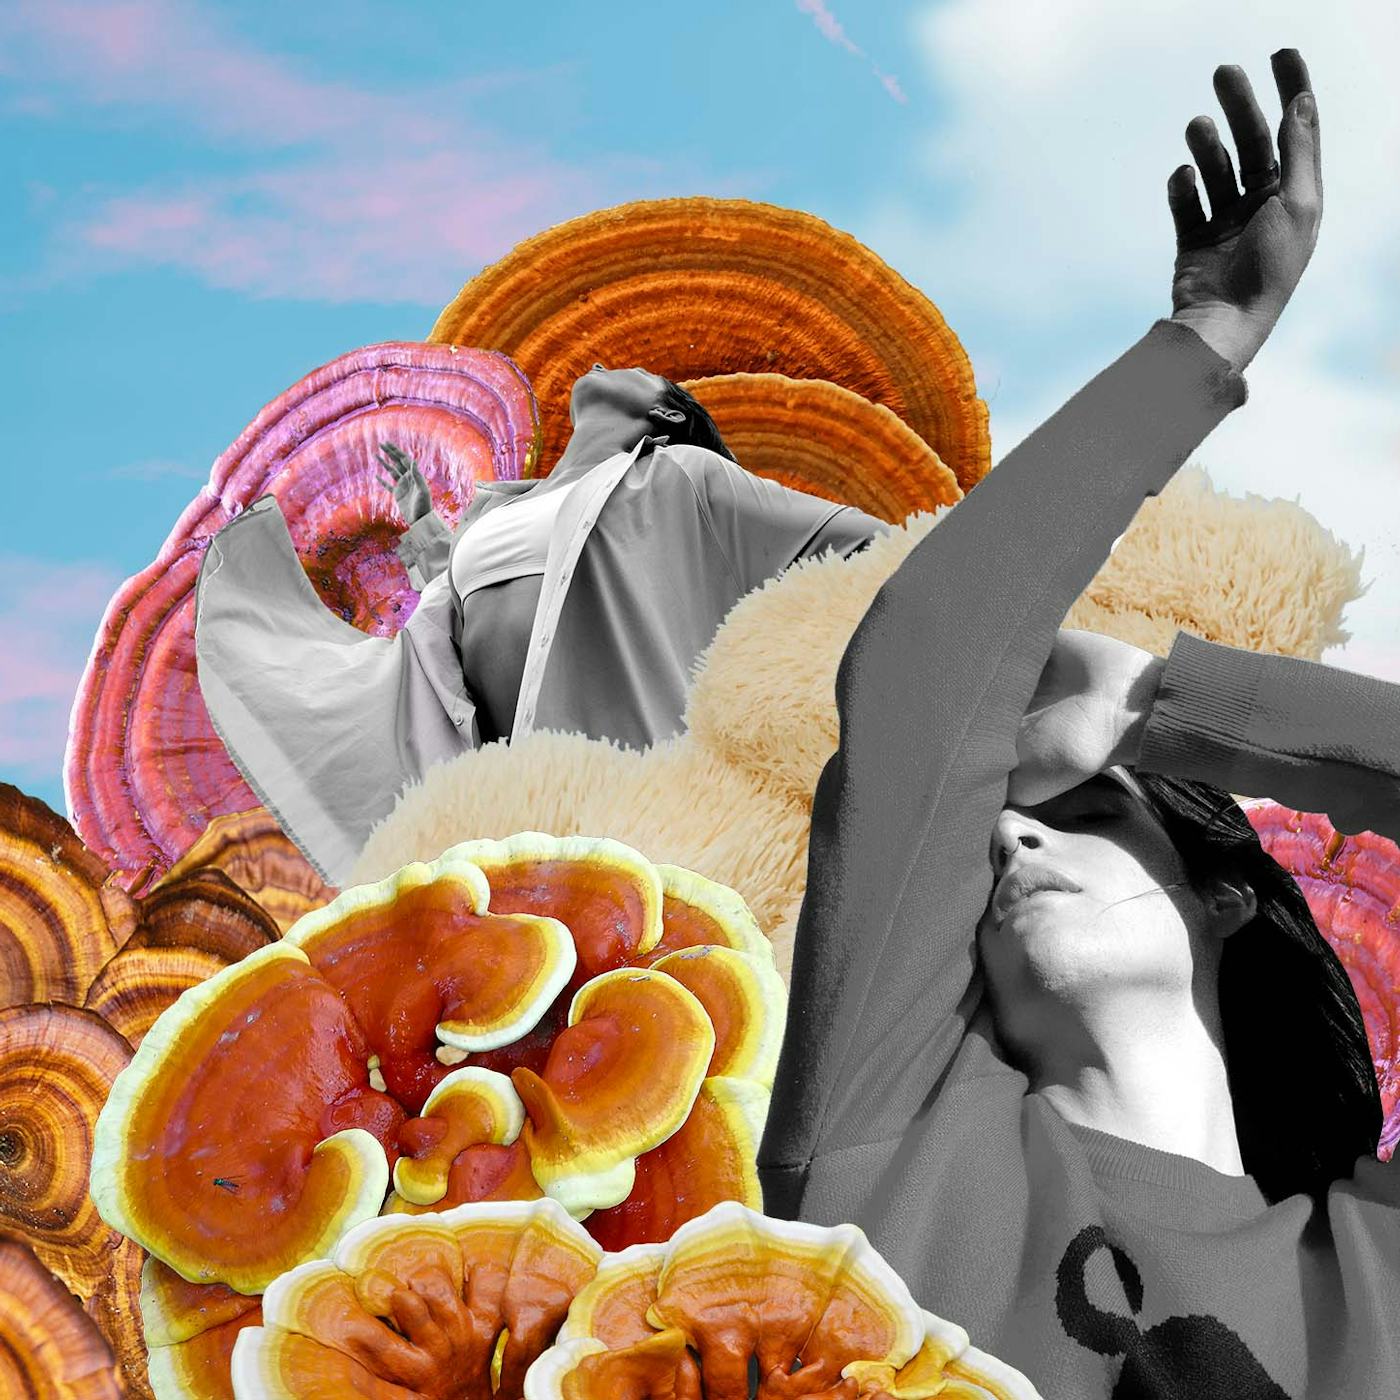 I Tried Microdosing Mushrooms For My Anxiety — Here's What Happened